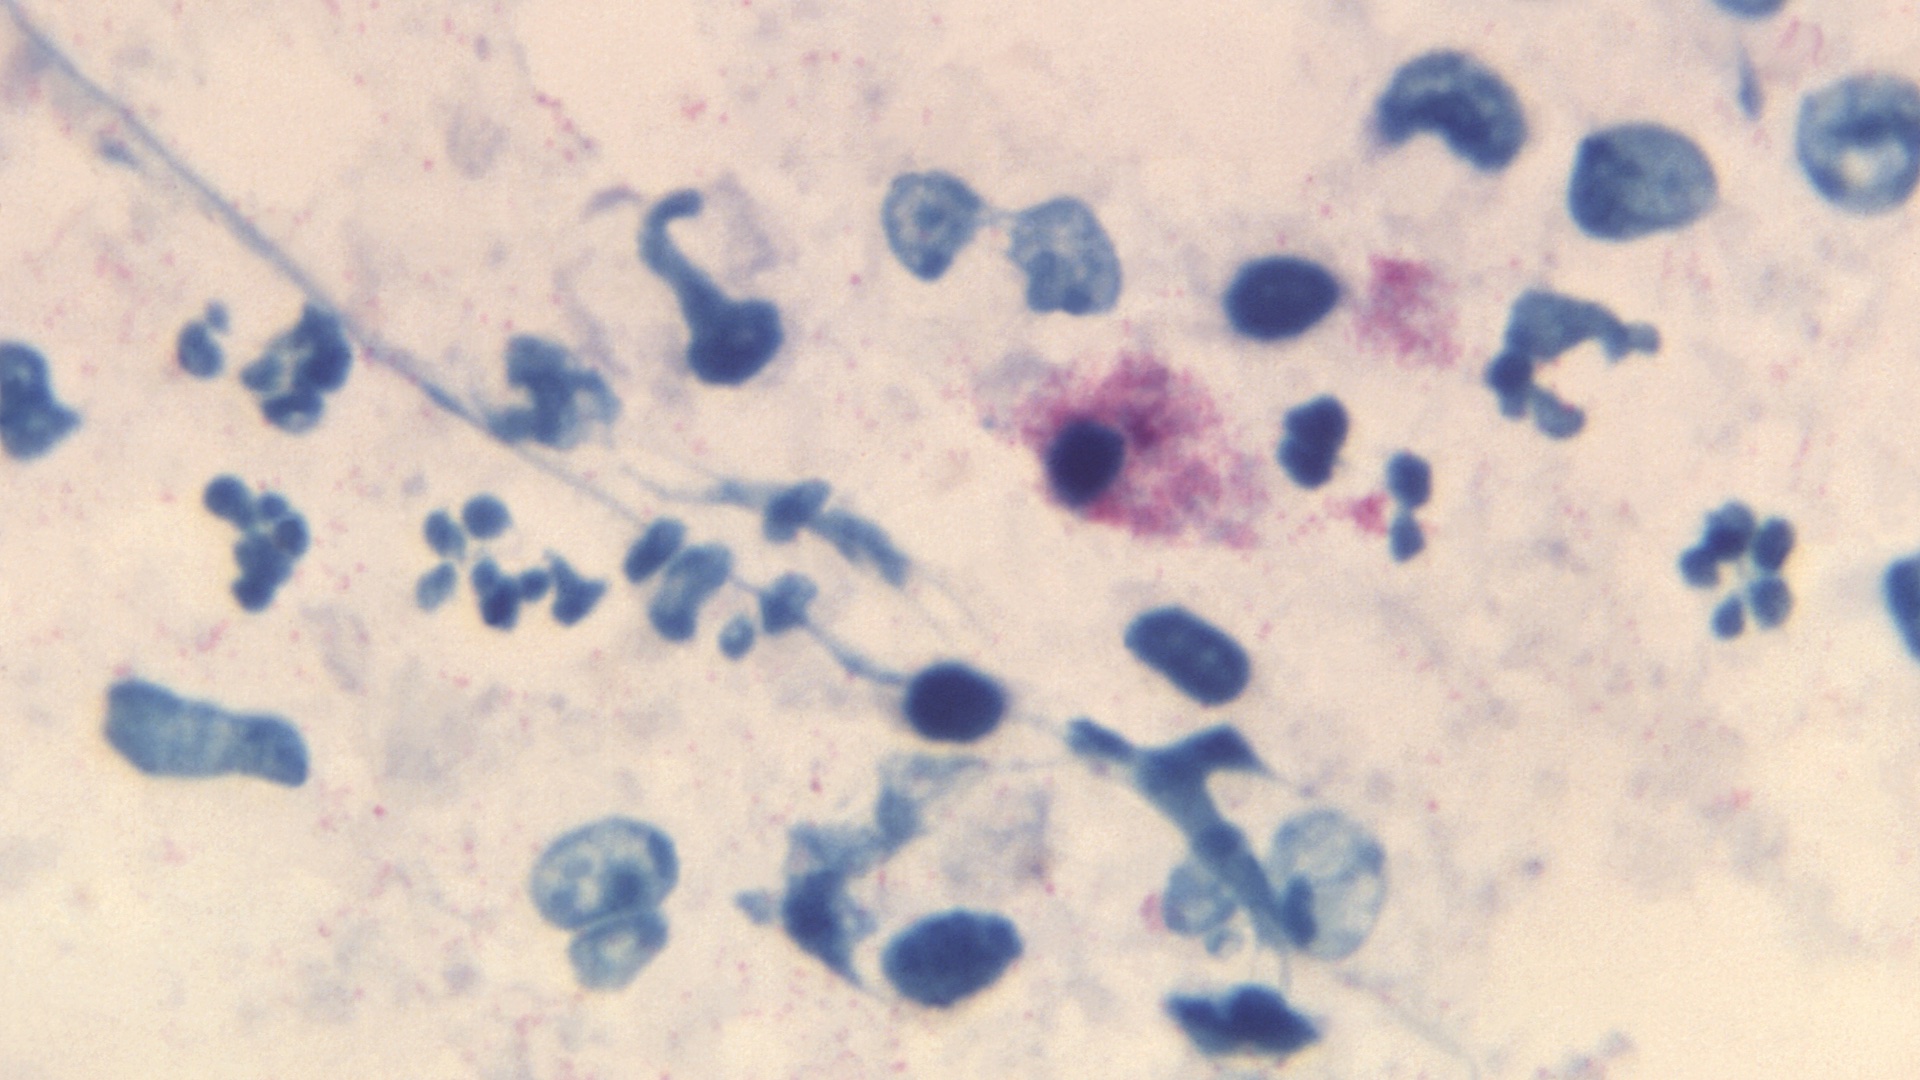 A pictograph of  Chlamydophila psittaci bacterial cells, stained blueittacosis.